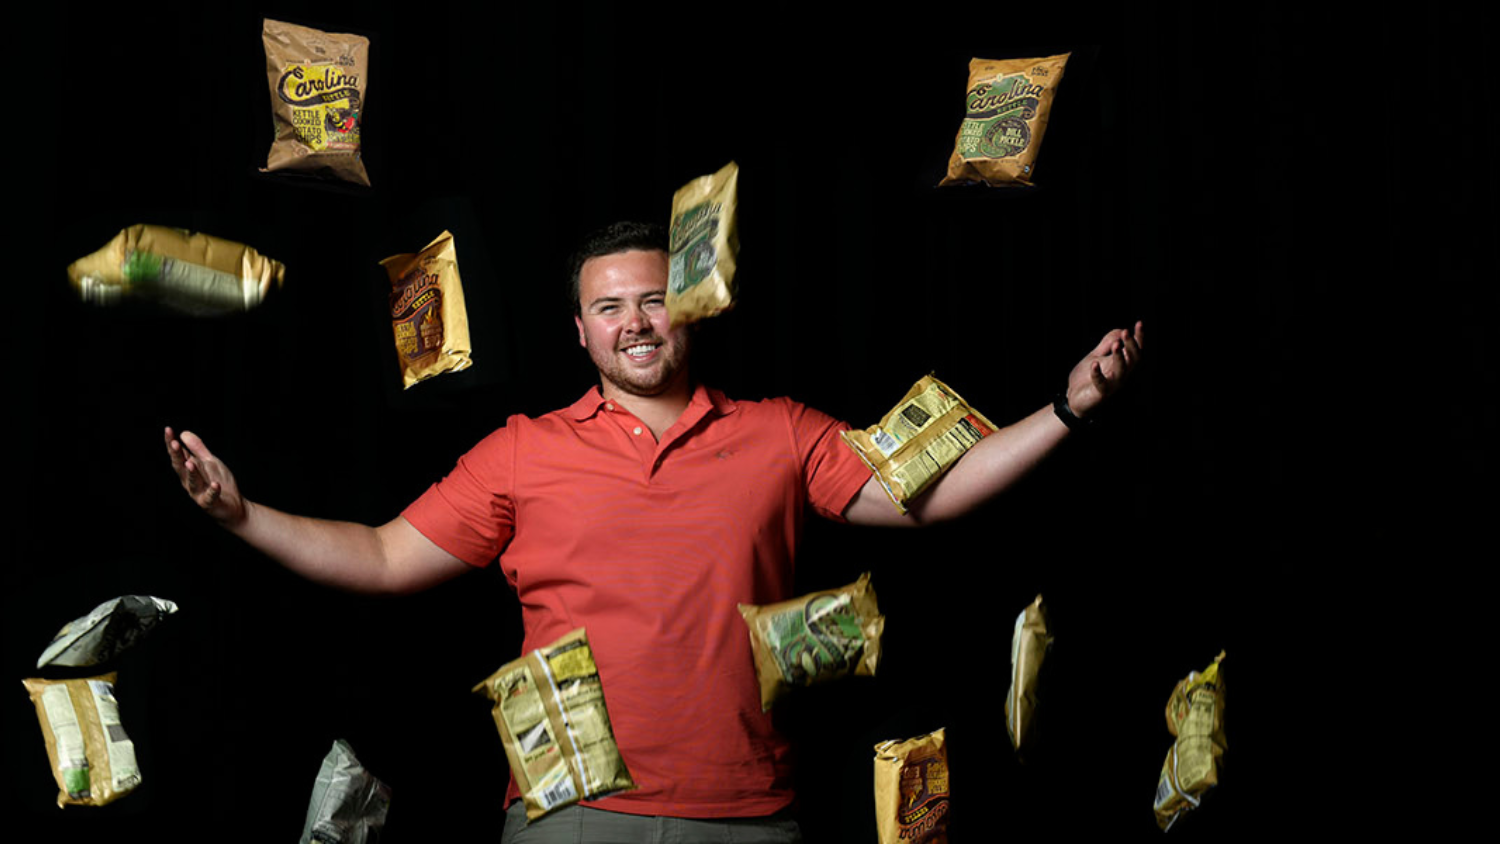 Josh Monahan with bags of chips in the air